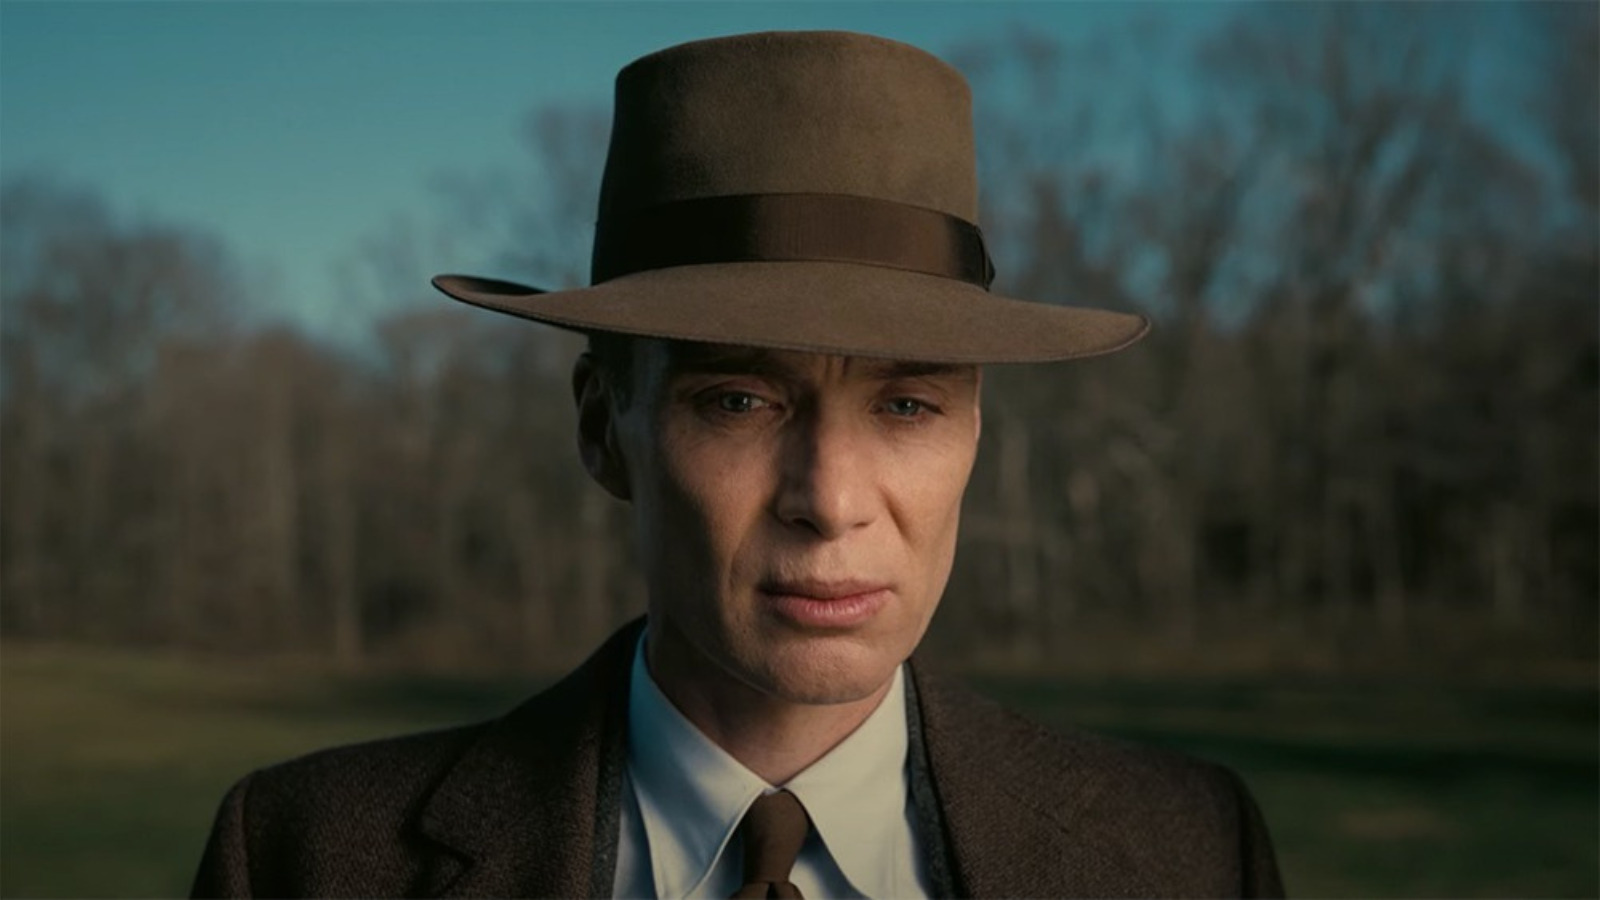 Emily Blunt Reveals Cillian Murphy Went On A Crazy Strict Diet To Prepare for Oppenheimer